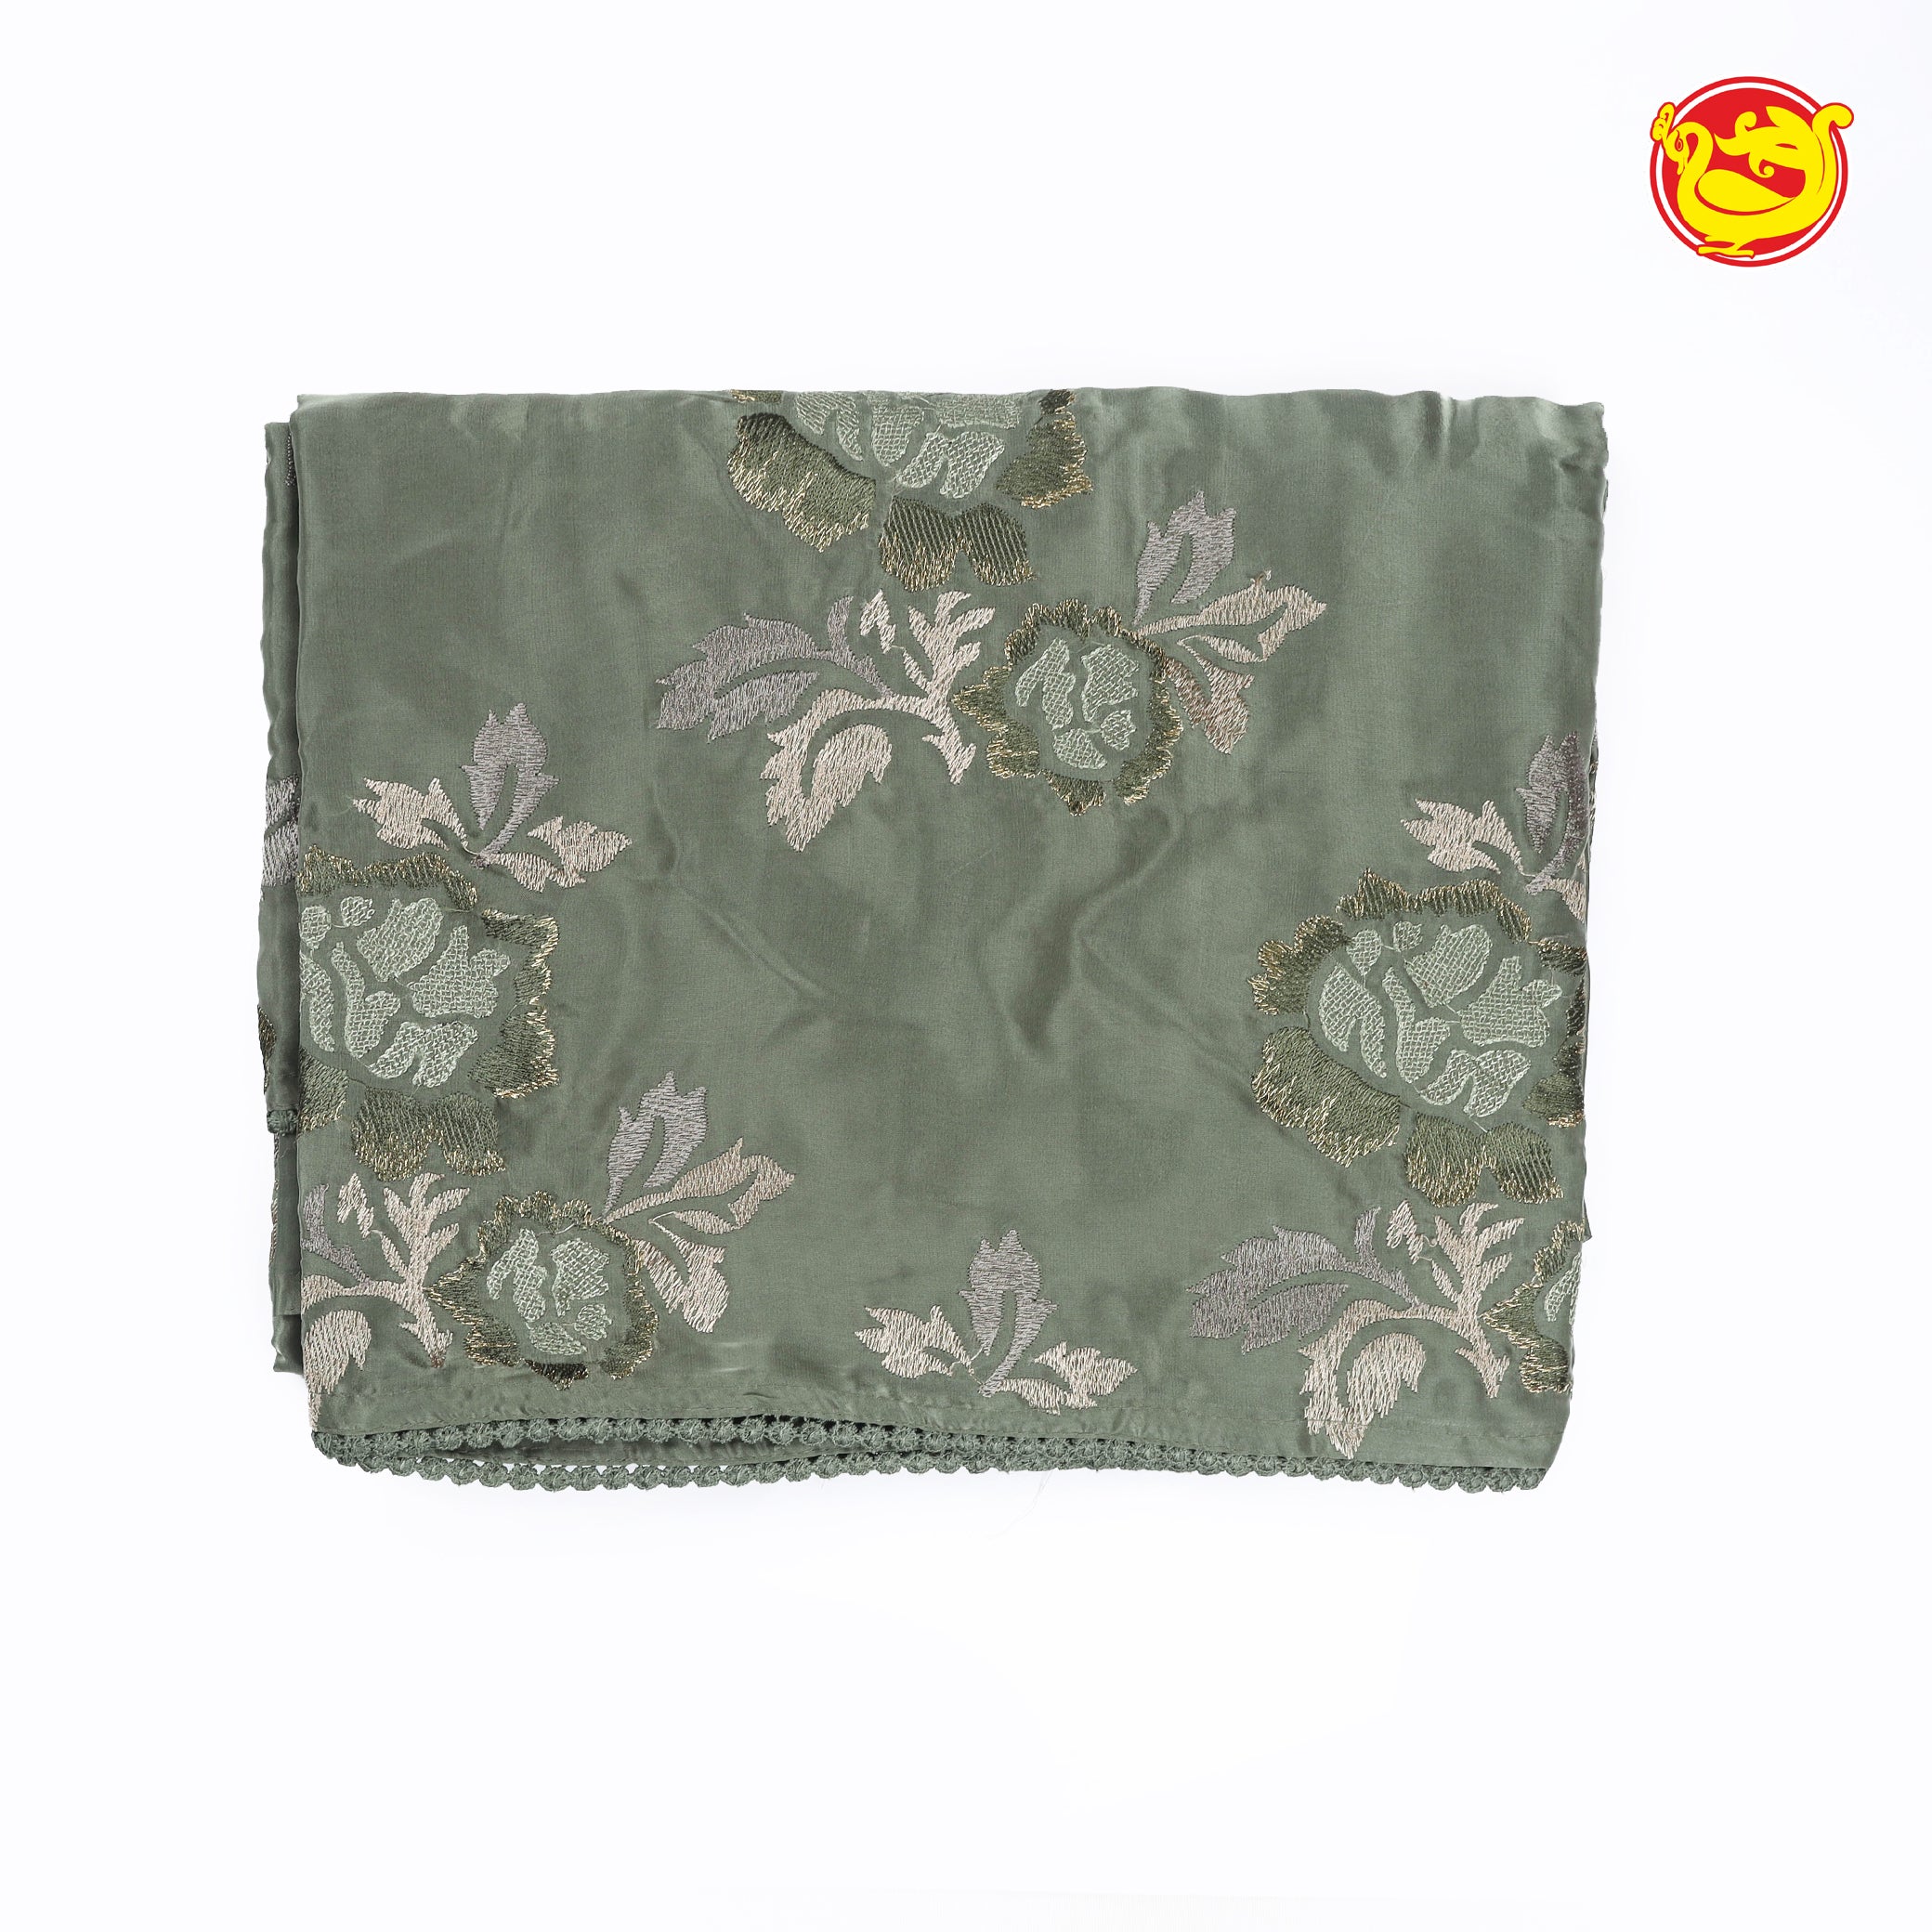 Olive green satin organza saree with embroidery